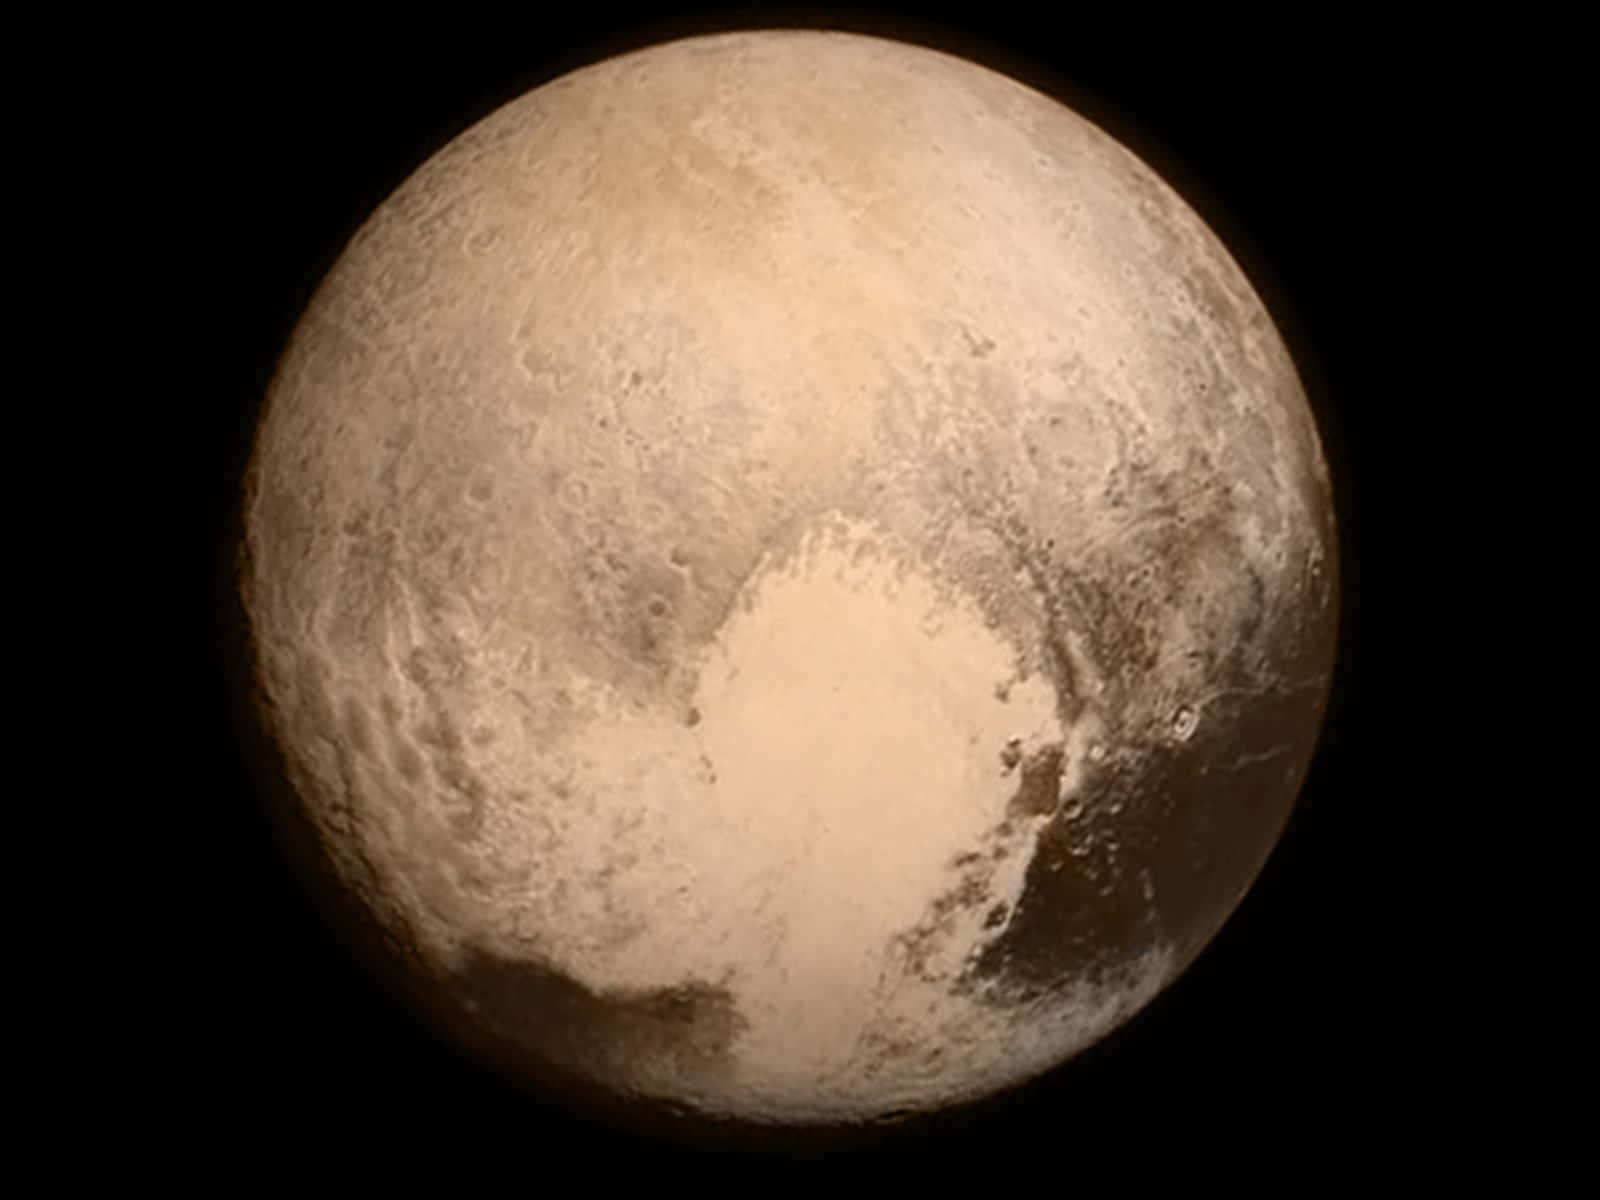 Pluto, the Planet on the edge of our Solar System